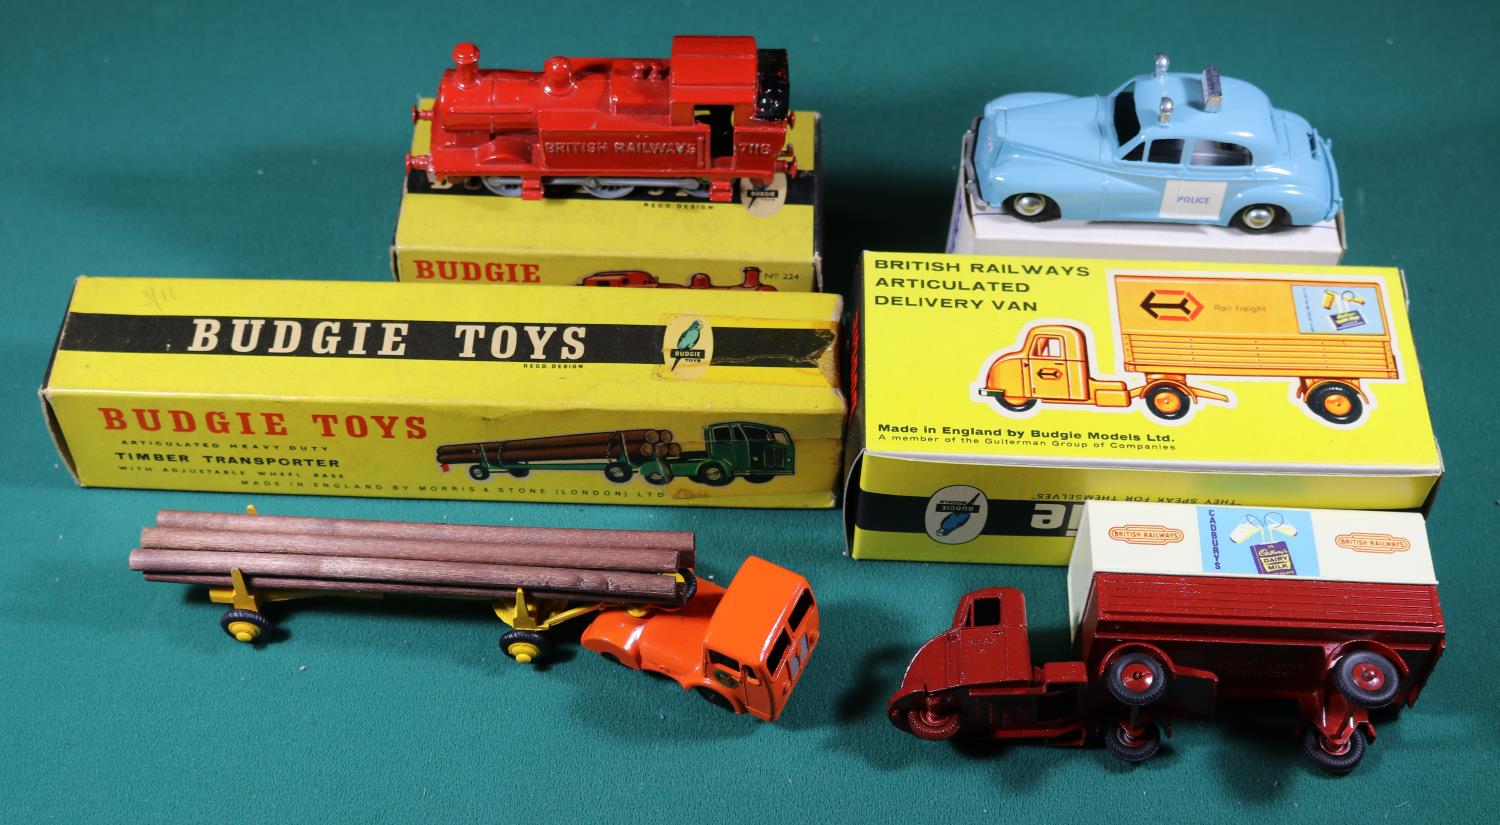 4 Budgie Toys. Articulated Heavy Duty Timber Transporter (230) in orange and yellow livery, with BRS